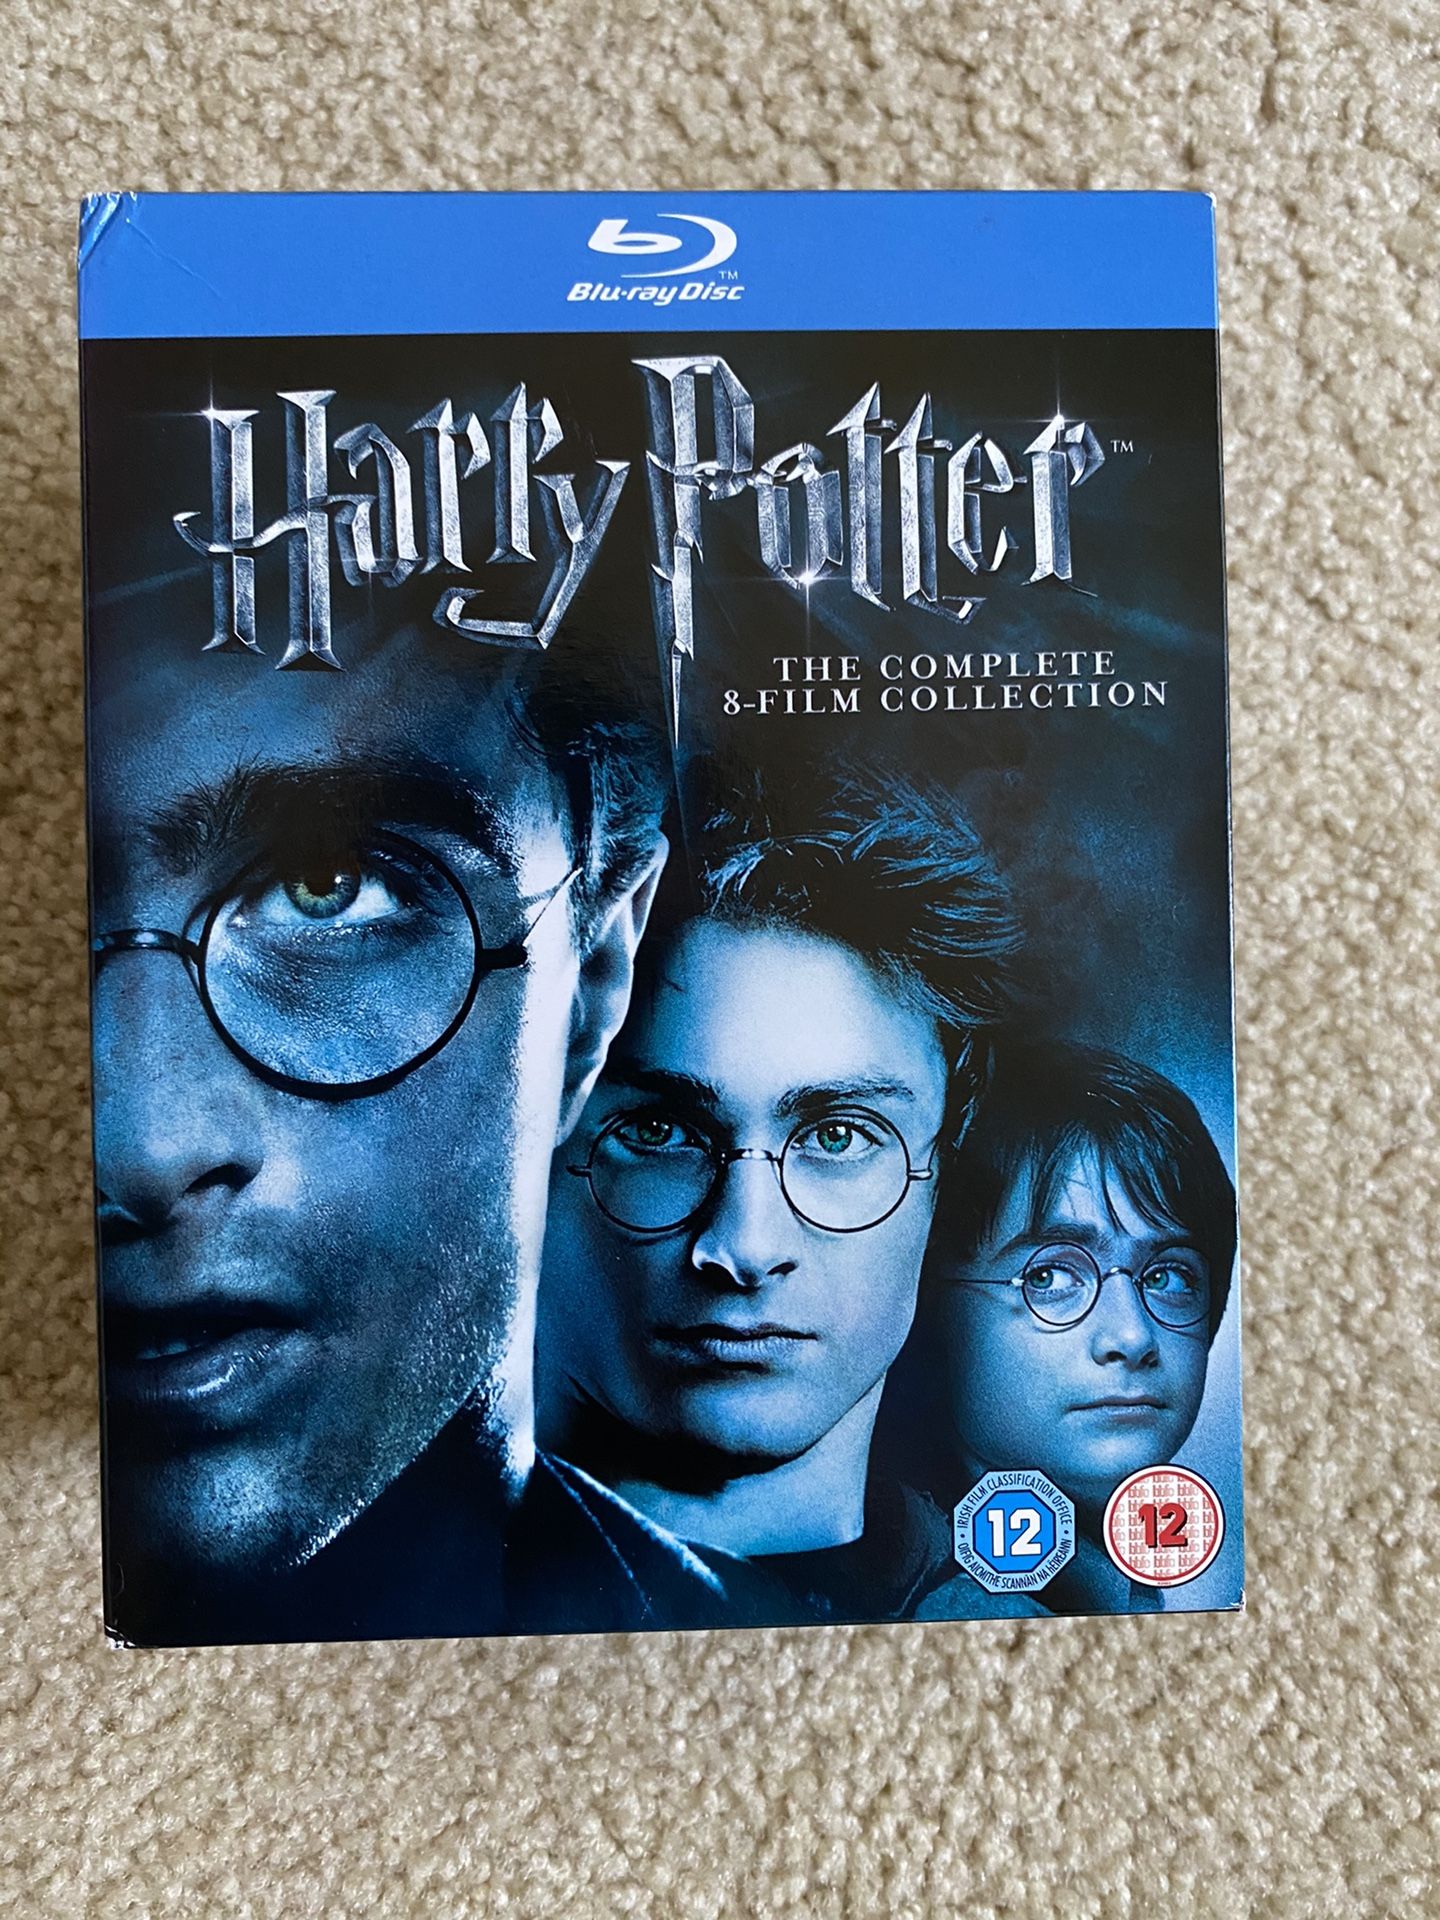 Harry Potter - The complete 8 film collection Blu-Ray